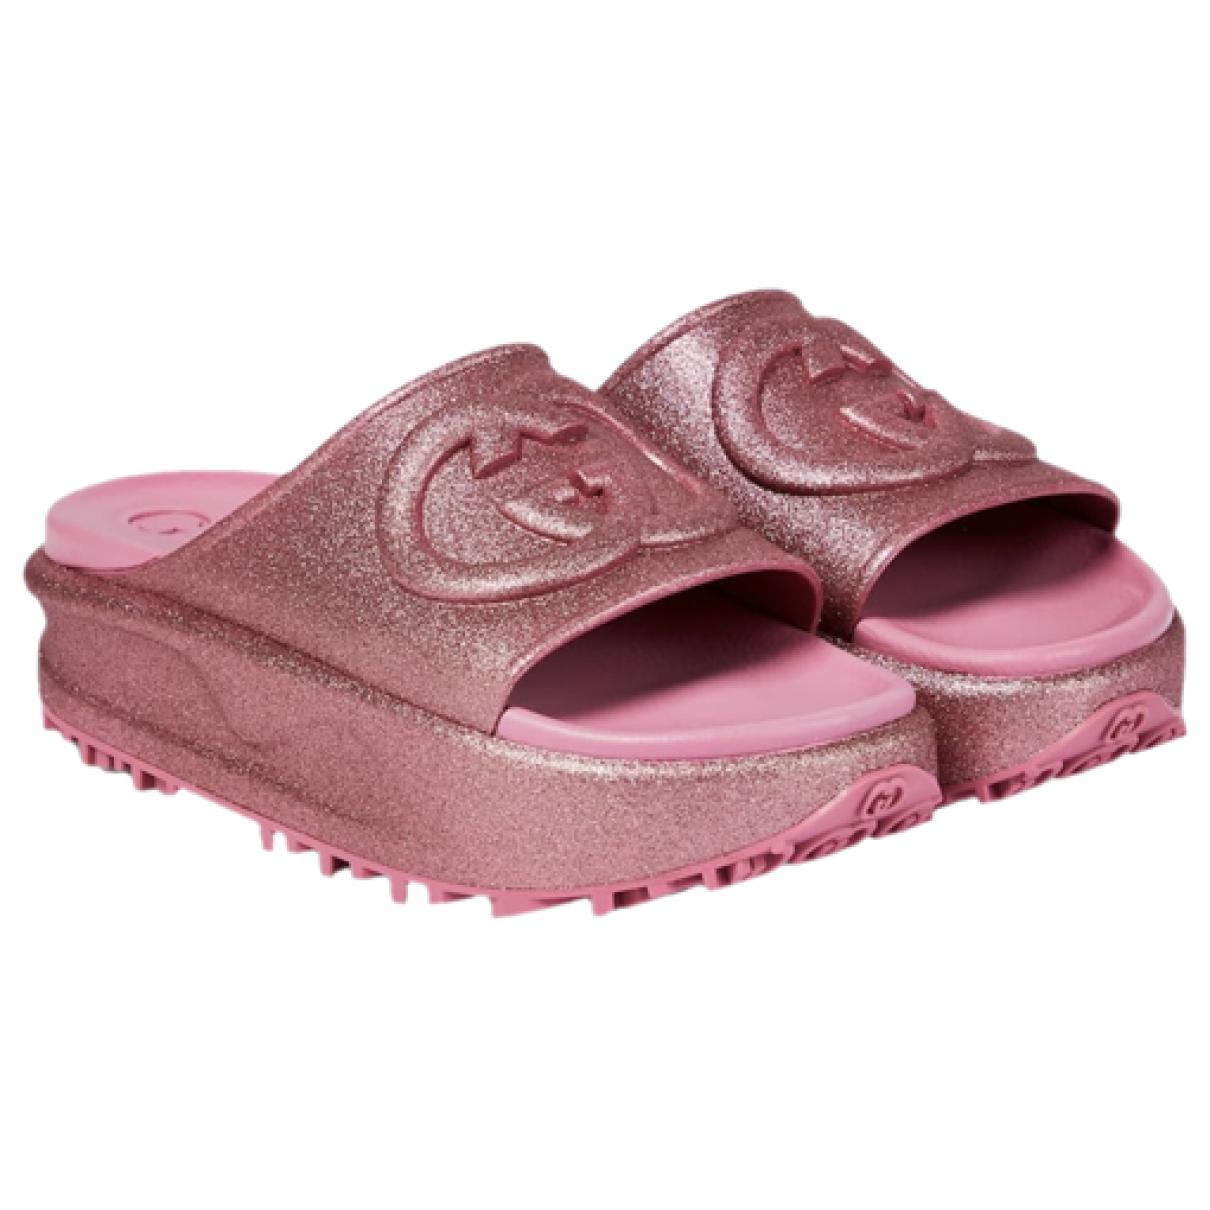 Louis Vuitton sliders creme and pink 38.5 – LuxuryPromise